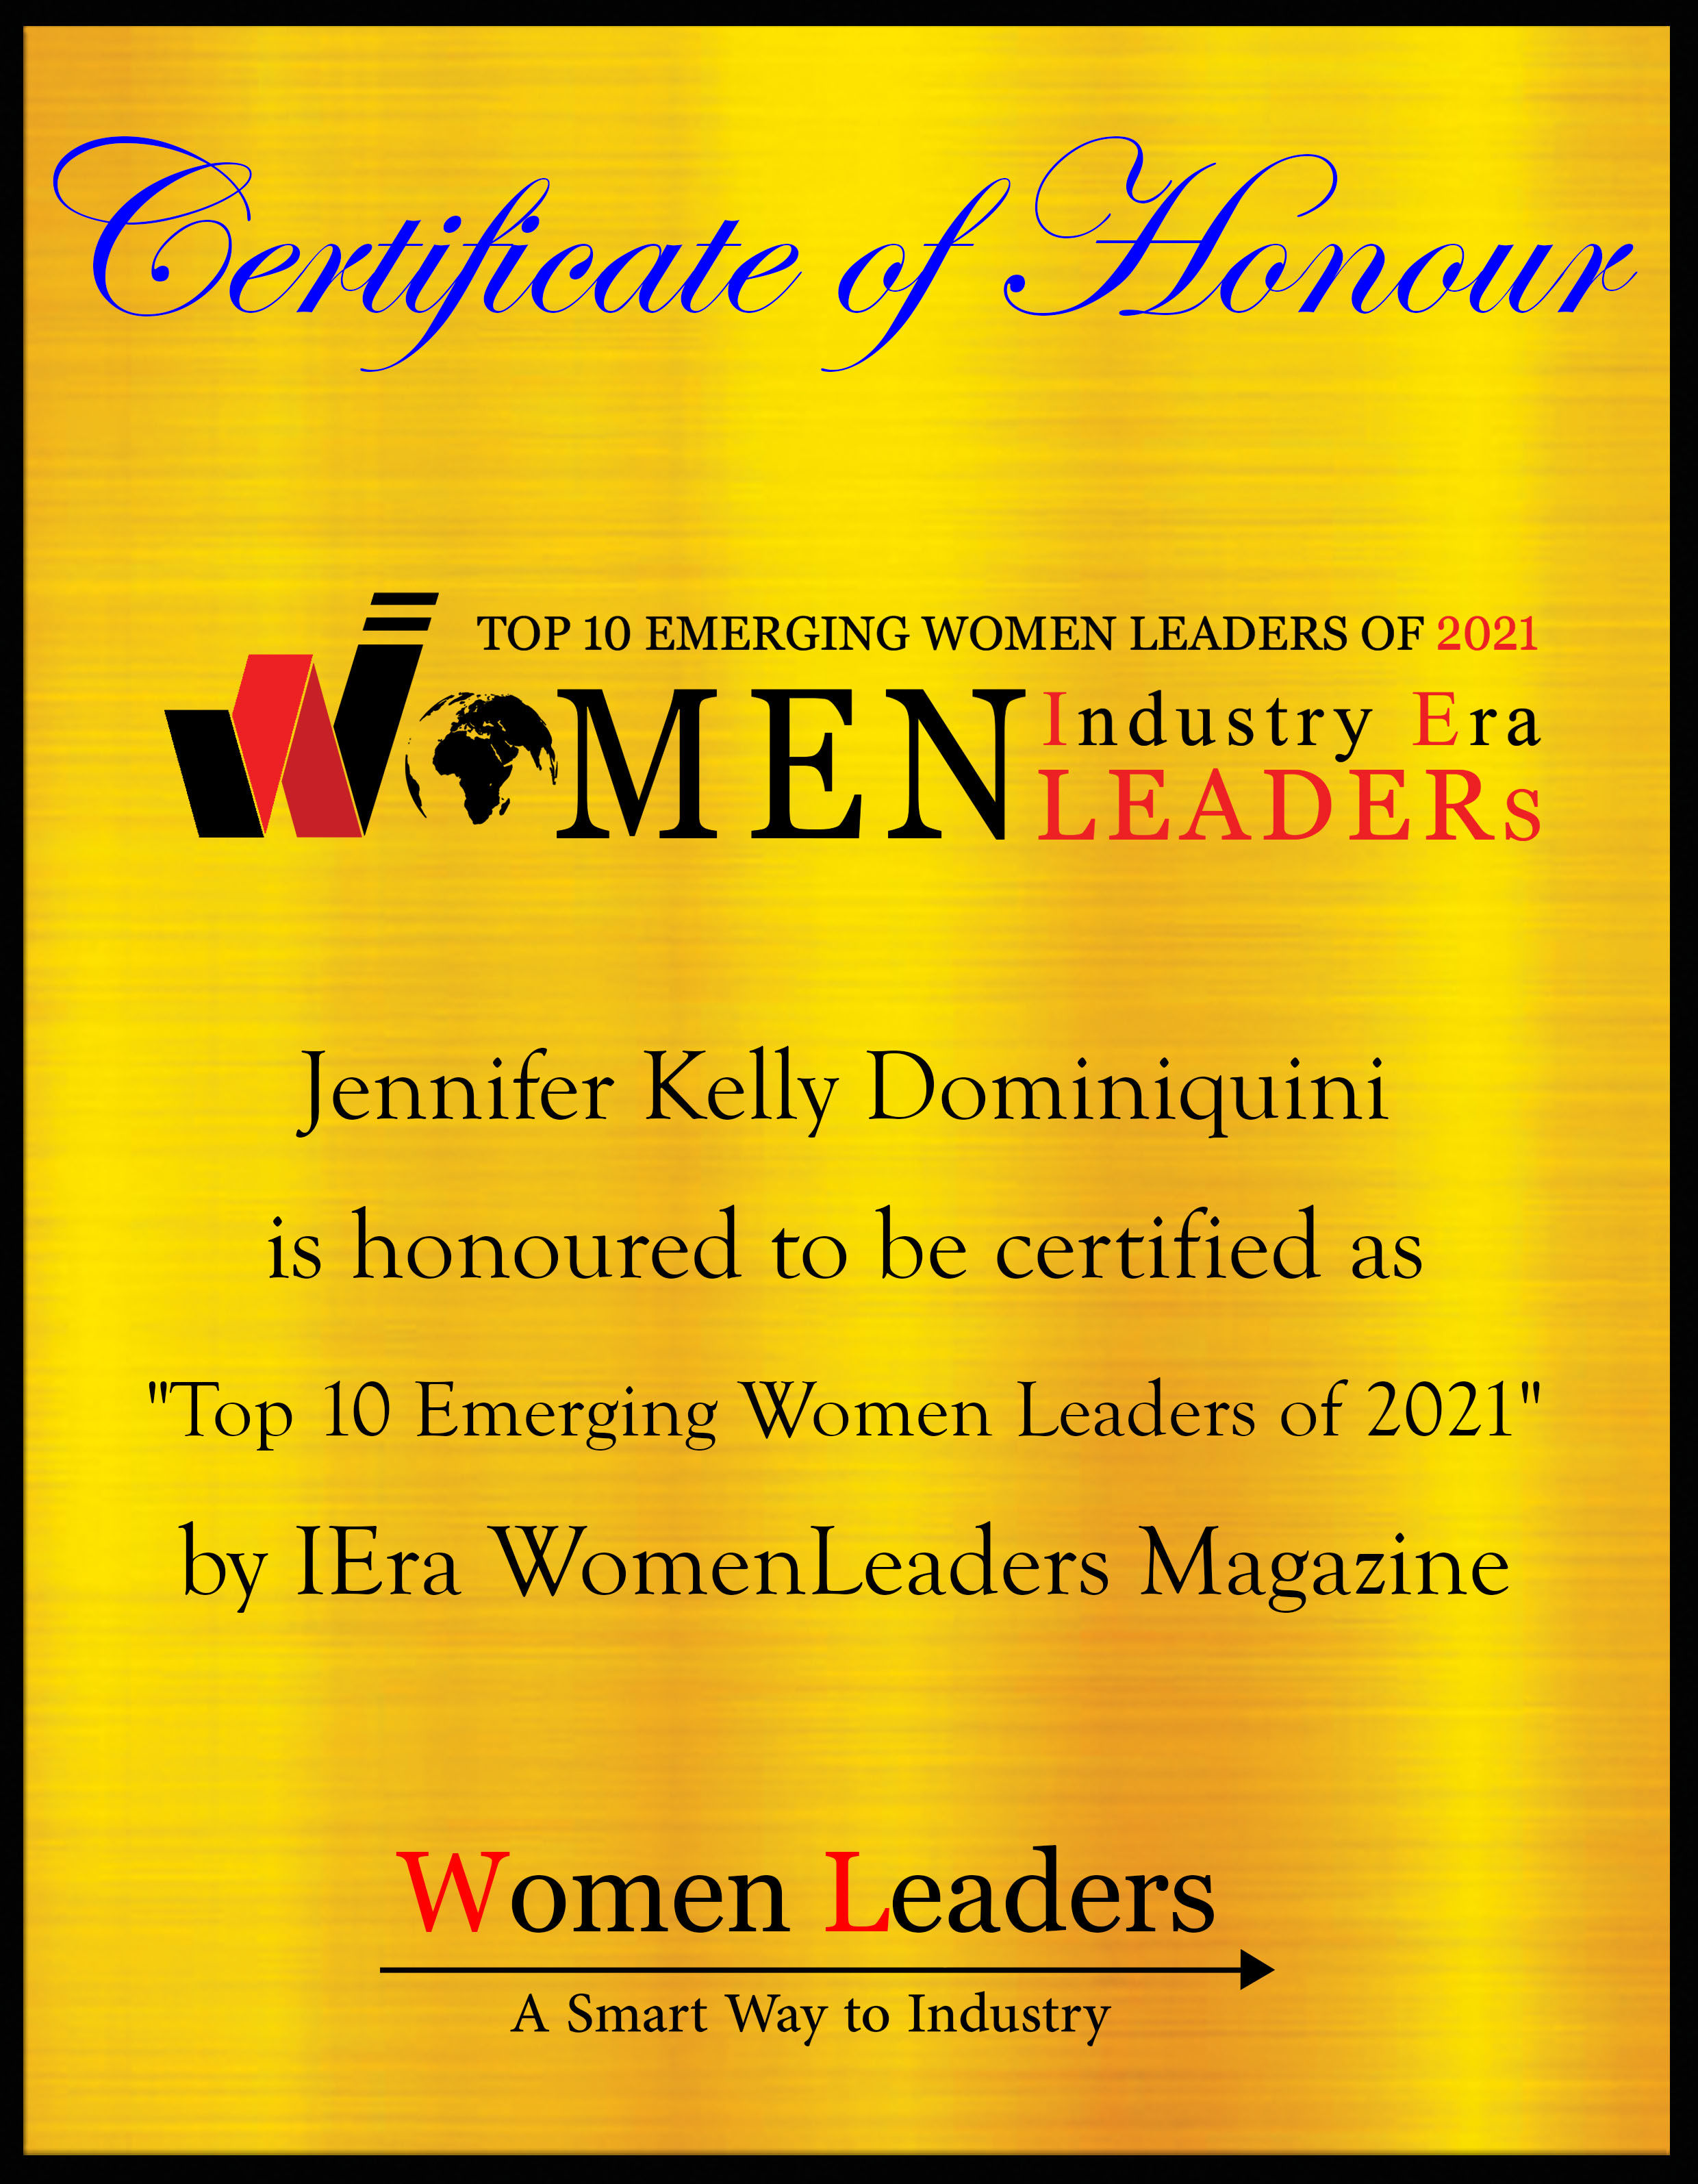 Jennifer Kelly Dominiquini, Founder & CMO of Frontline Strategy Advisors, Most Empowering Women Leaders of 2021